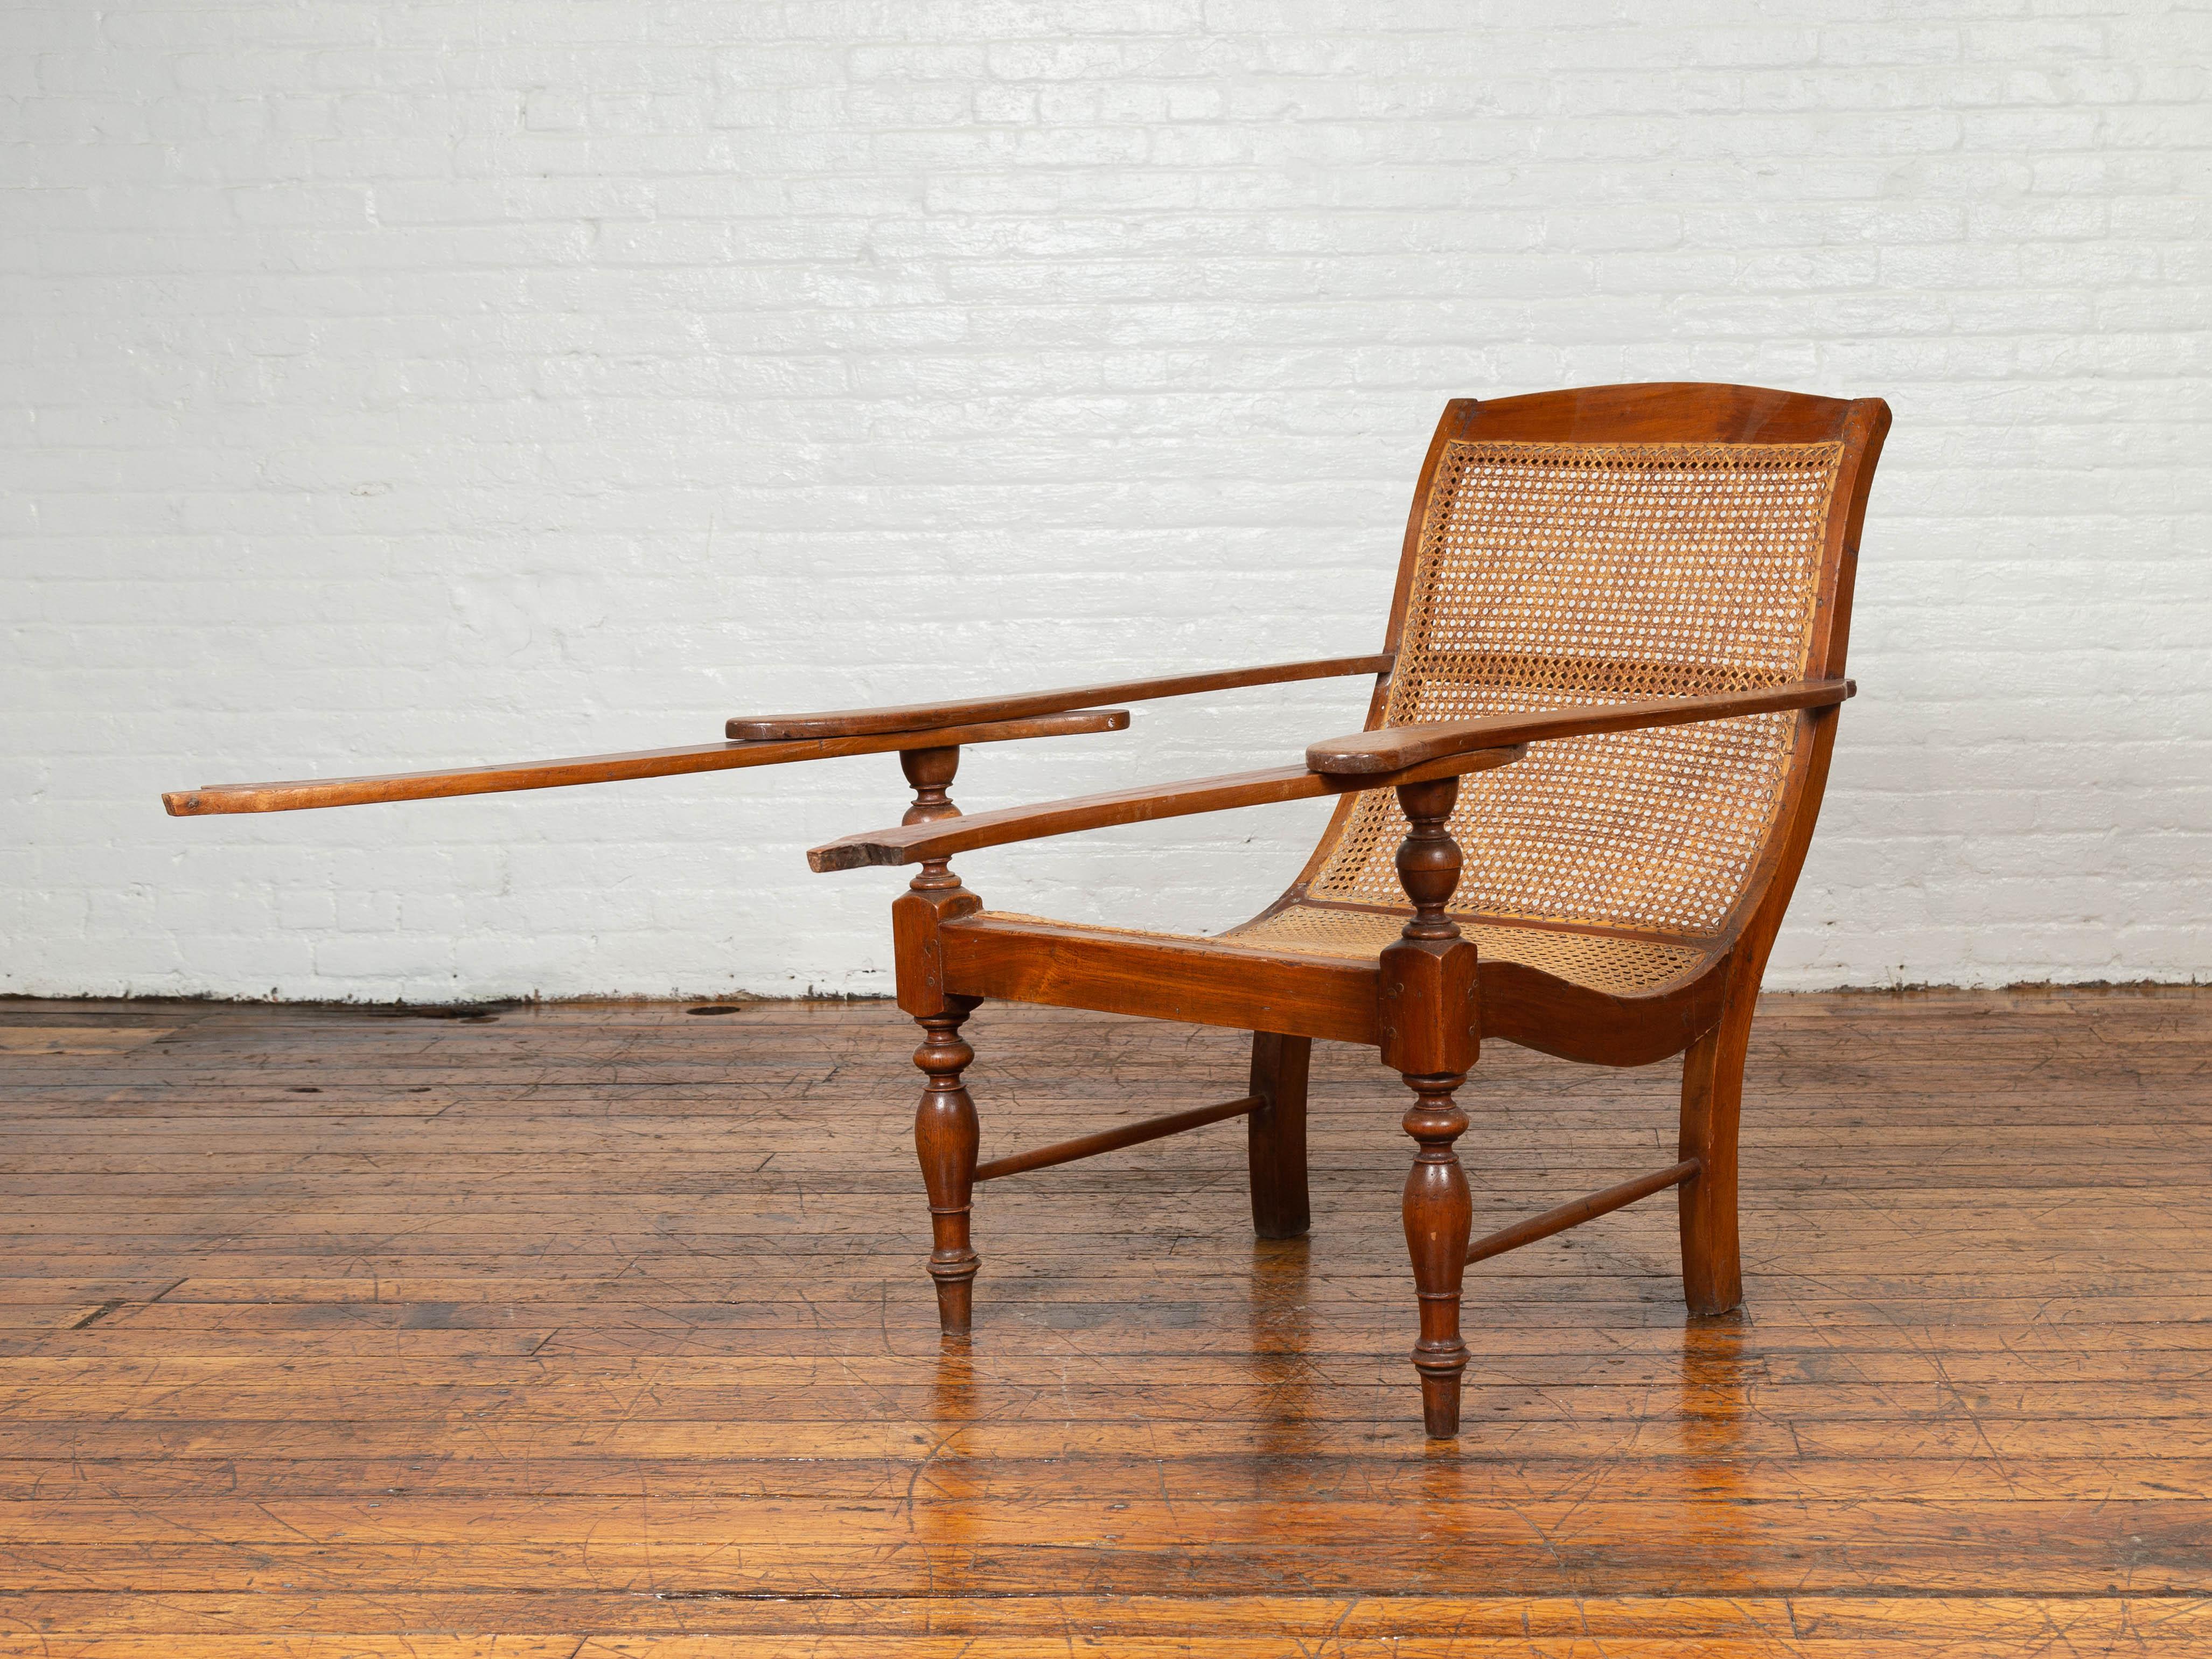 Dutch Colonial Vintage Teak Plantation Lounge Chair with Curving Seat and Rattan 2